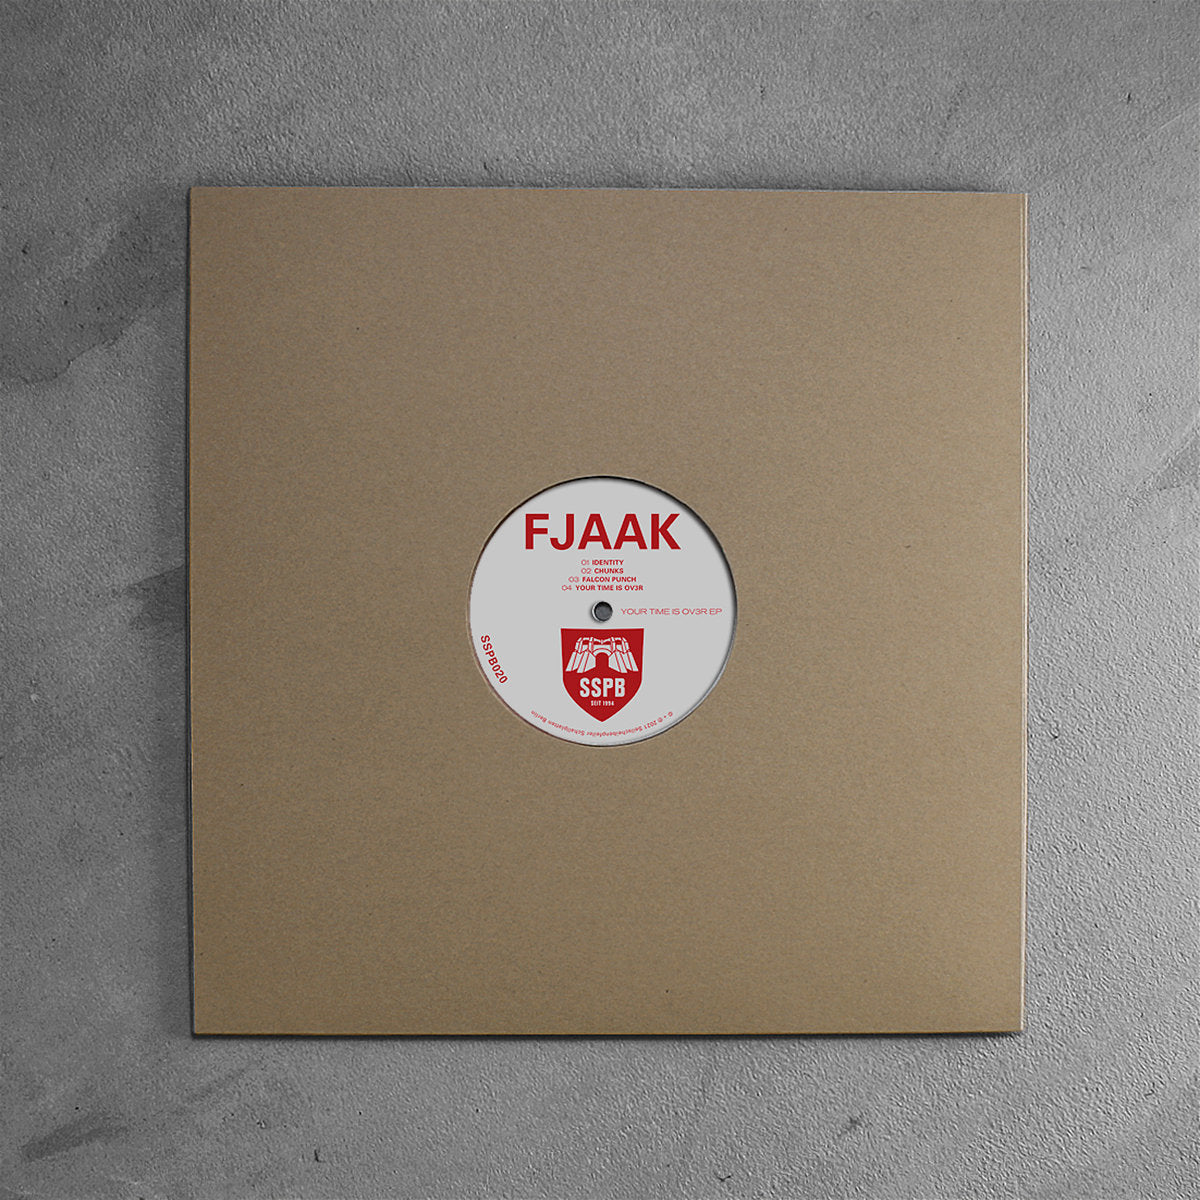 FJAAK 'YOUR TIME IS OV3R' 12" [IMPORT]